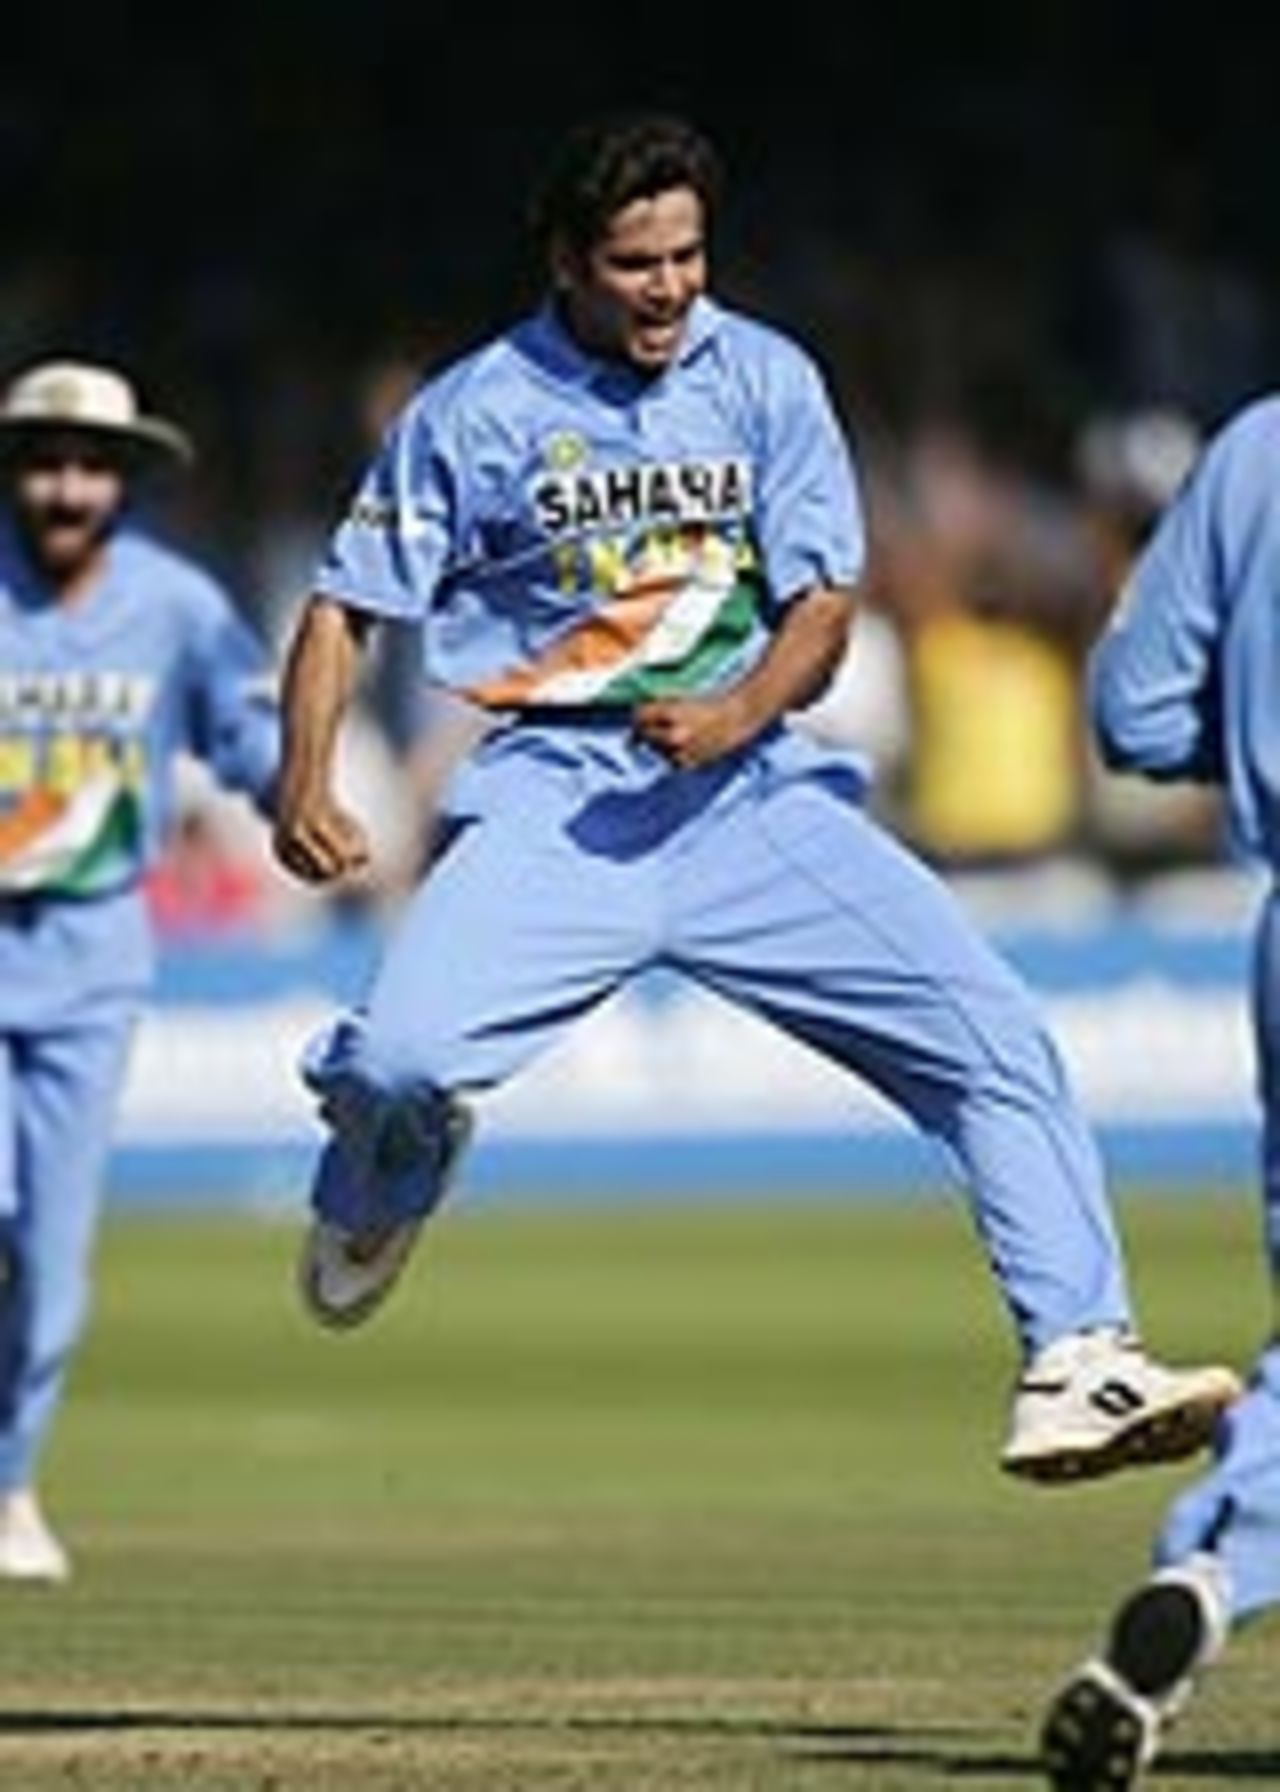 Irfan Pathan leaps for joy as England lose another wicket at Lord's, England v India, 3rd ODI, NatWest Challenge, September 5 2004